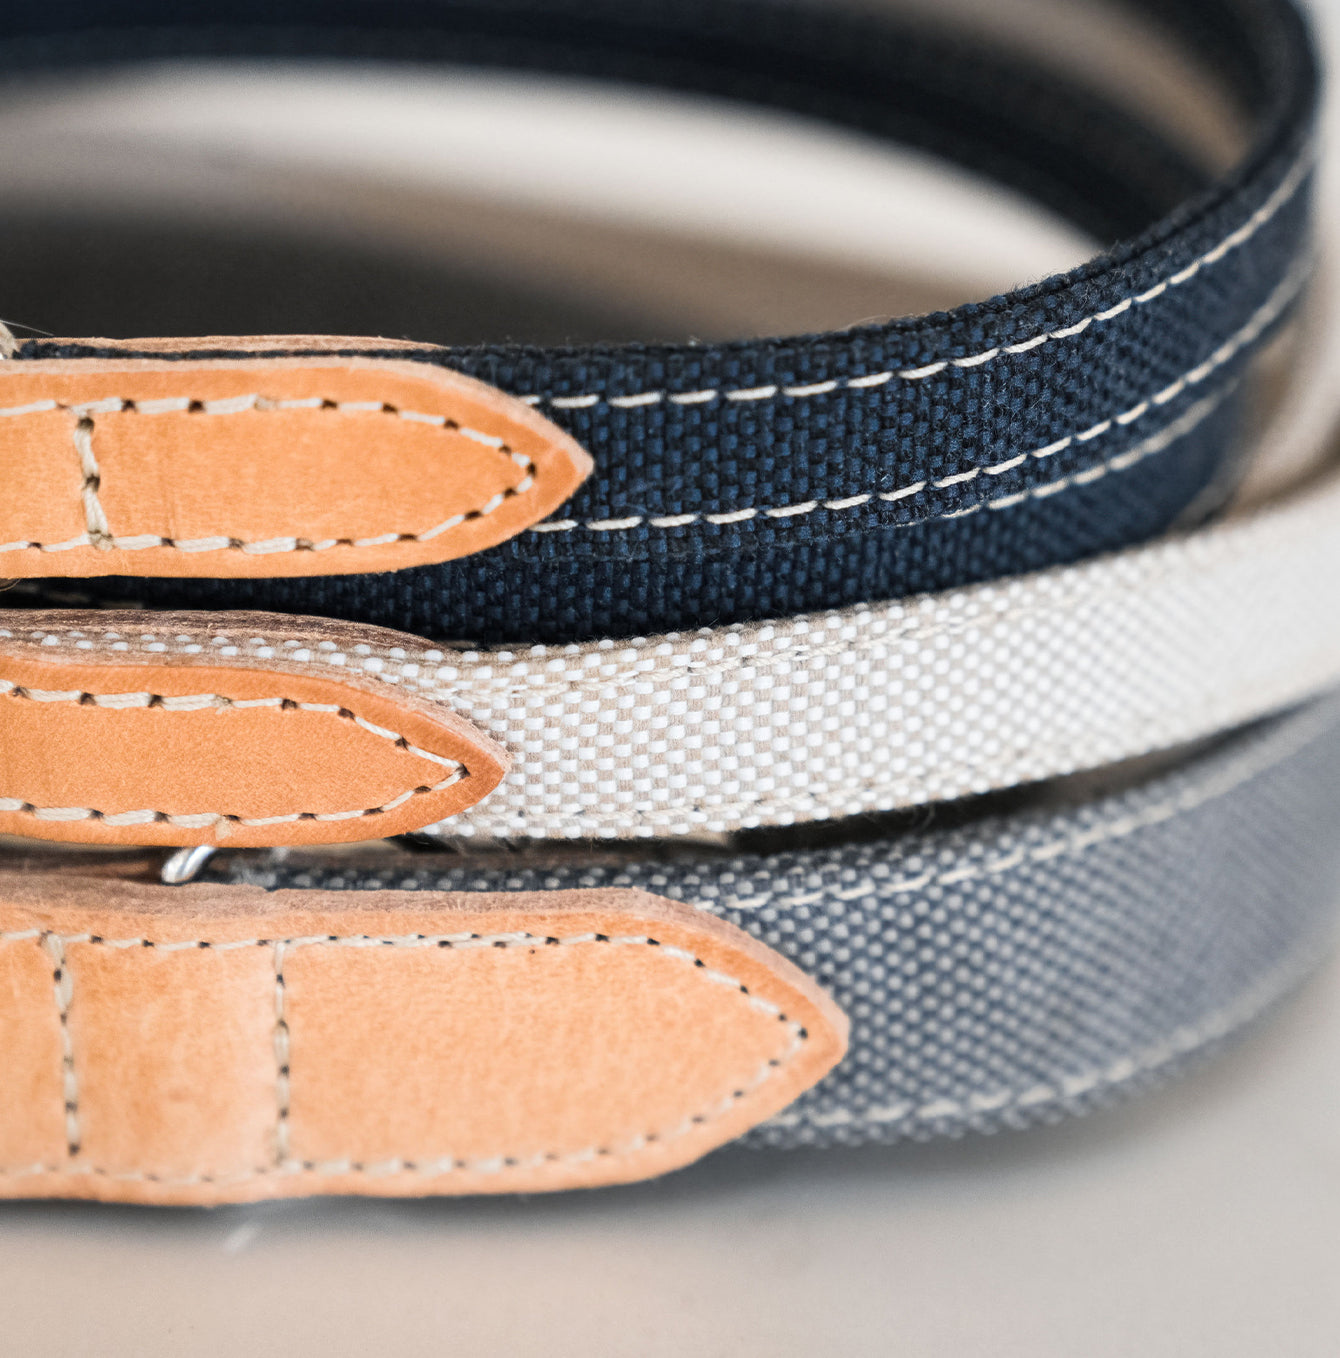 Discover dog walking luxury with our handcrafted Italian dog collar in beautiful essentials twill navy denim with denim blue fabric! The perfect collar for dogs available now at Lords & Labradors US